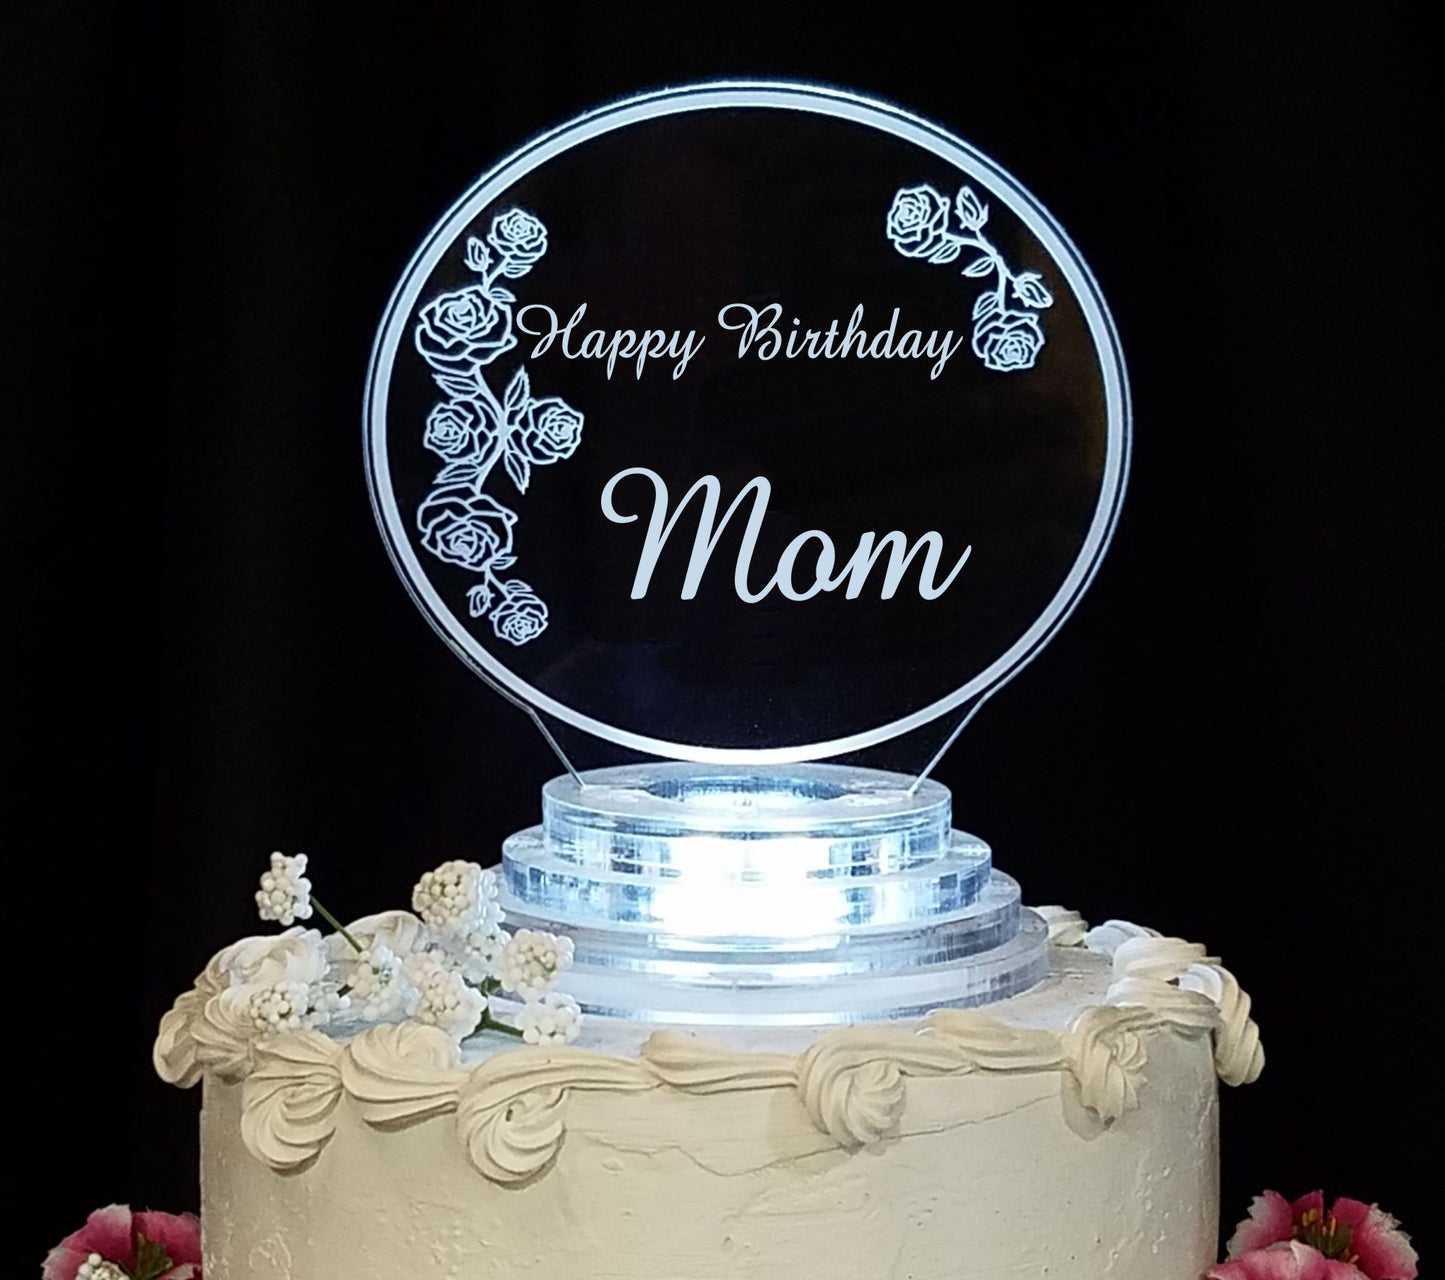 clear acrylic cake topper designed in a rose and rosebud theme,  engraved with Happy Birthday and name